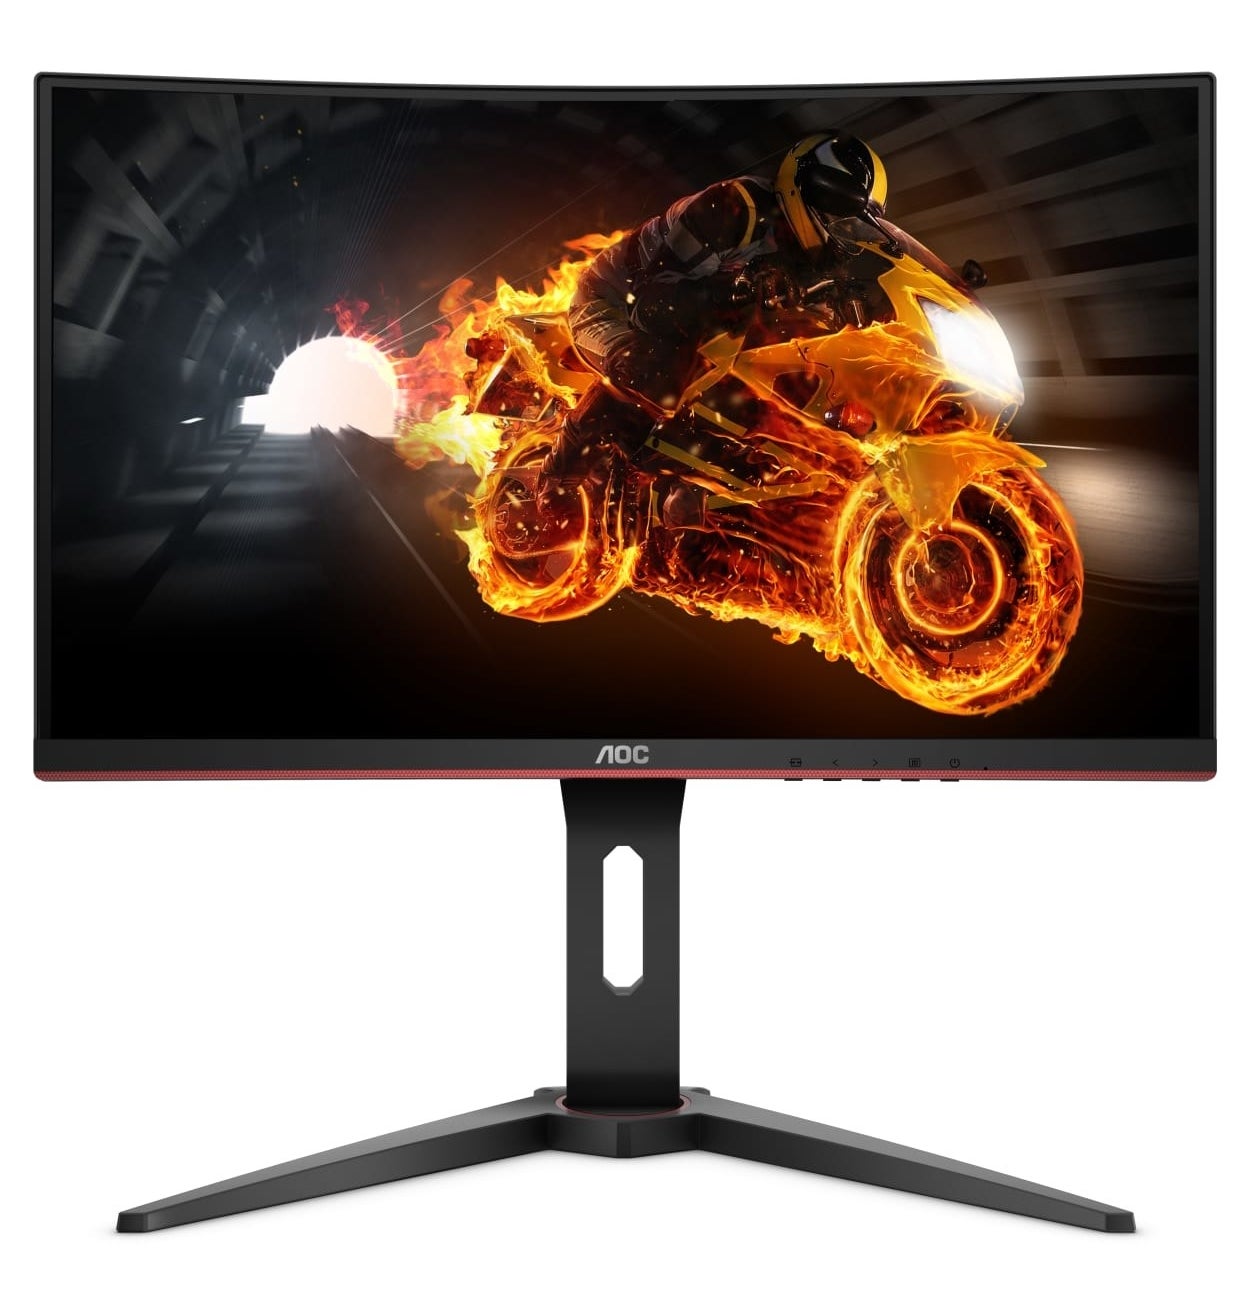 the curved PC monitor